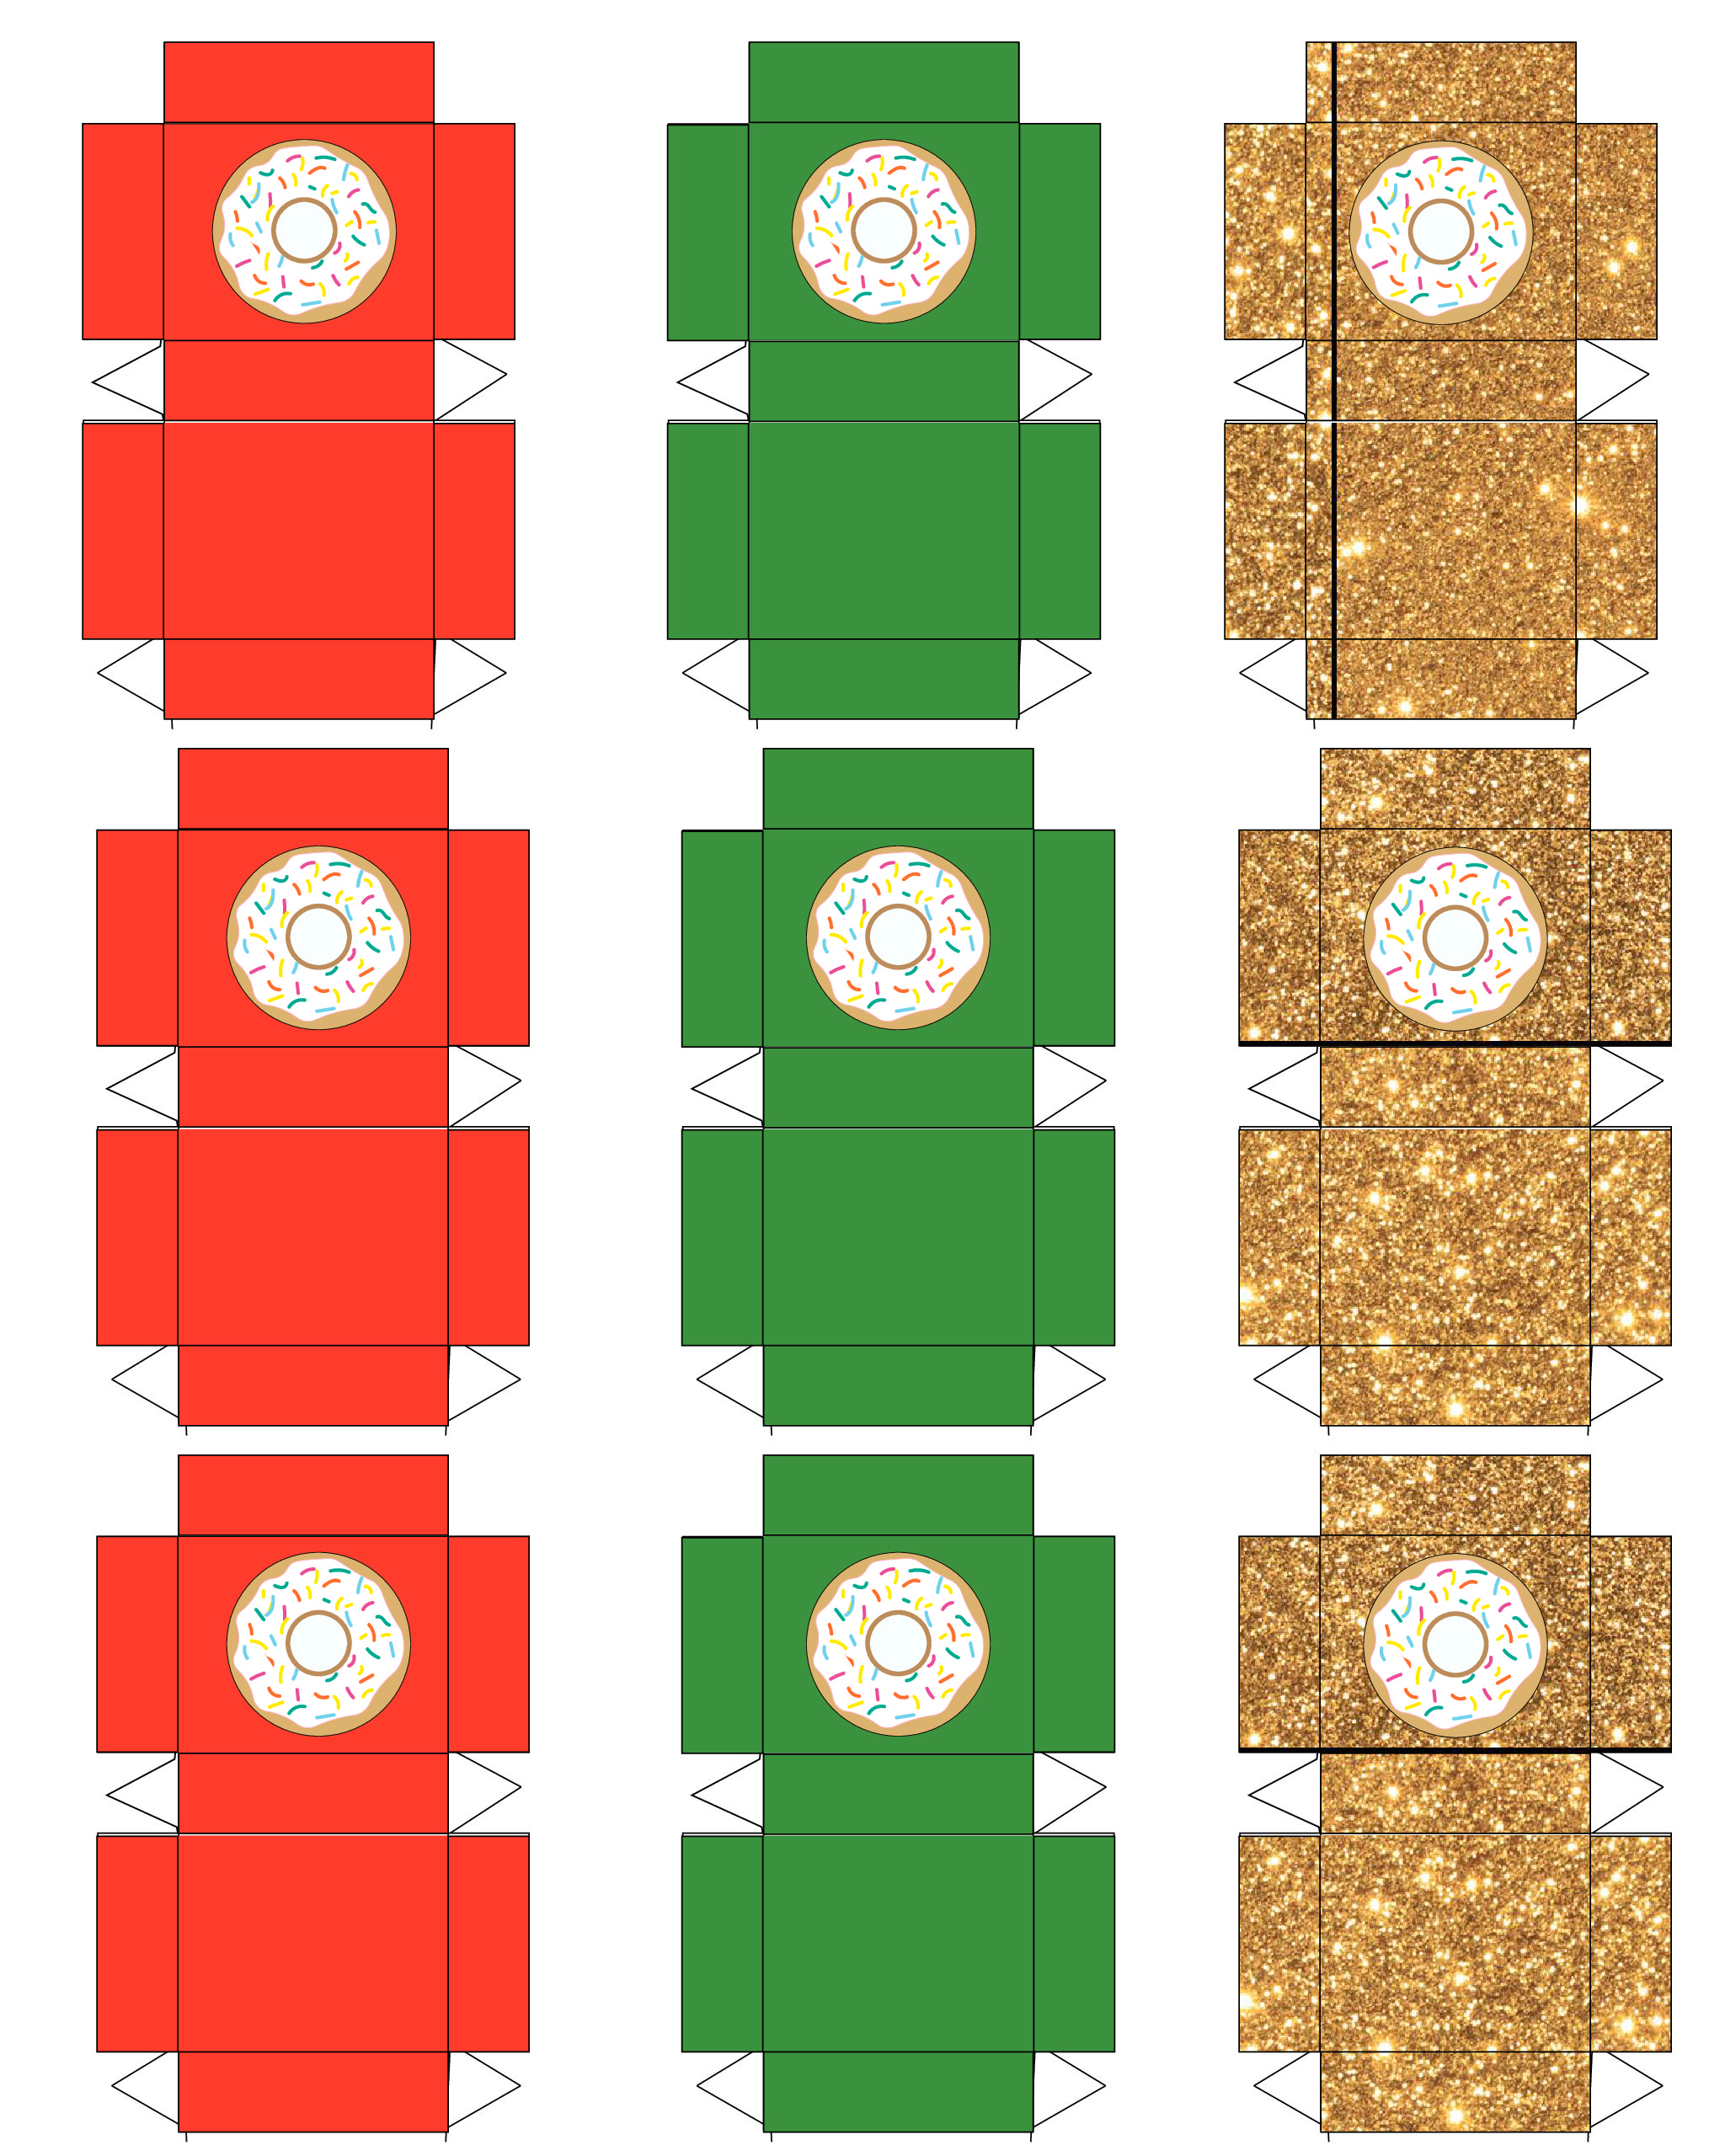 Elf on the Shelf Printable Donut Boxes for your elf on the shelf ideas via Mandy's Party Printables